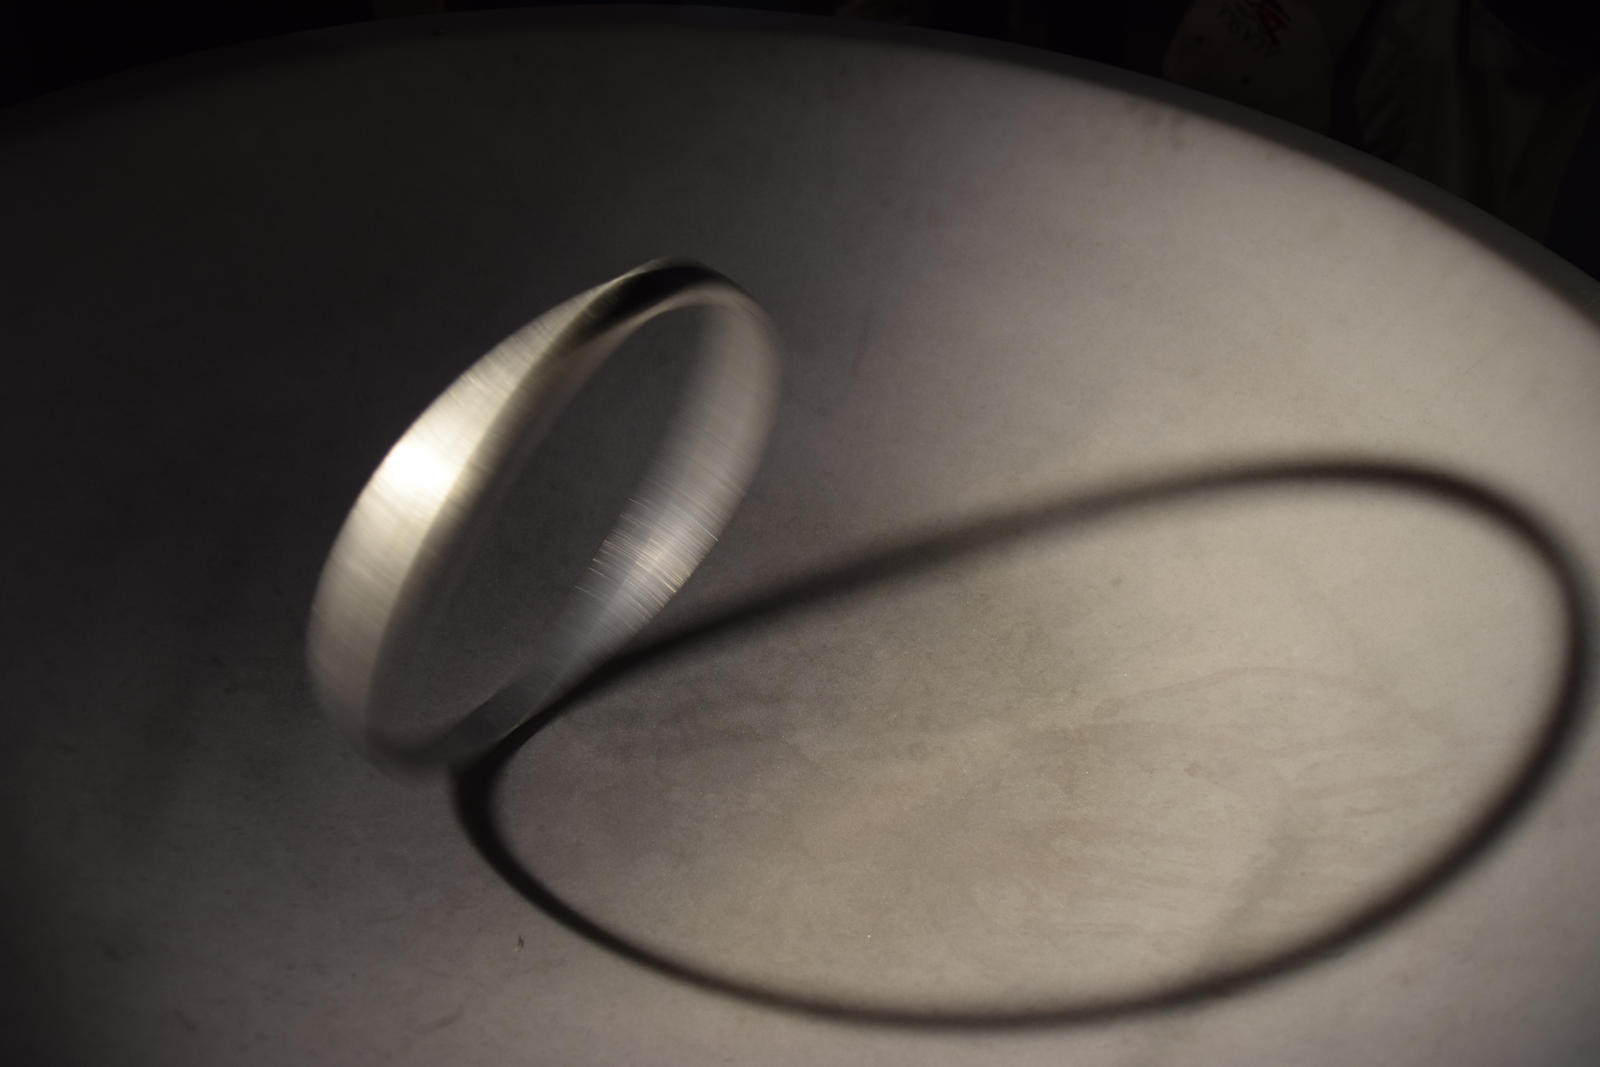 Spinning Ring In Light And Shadow